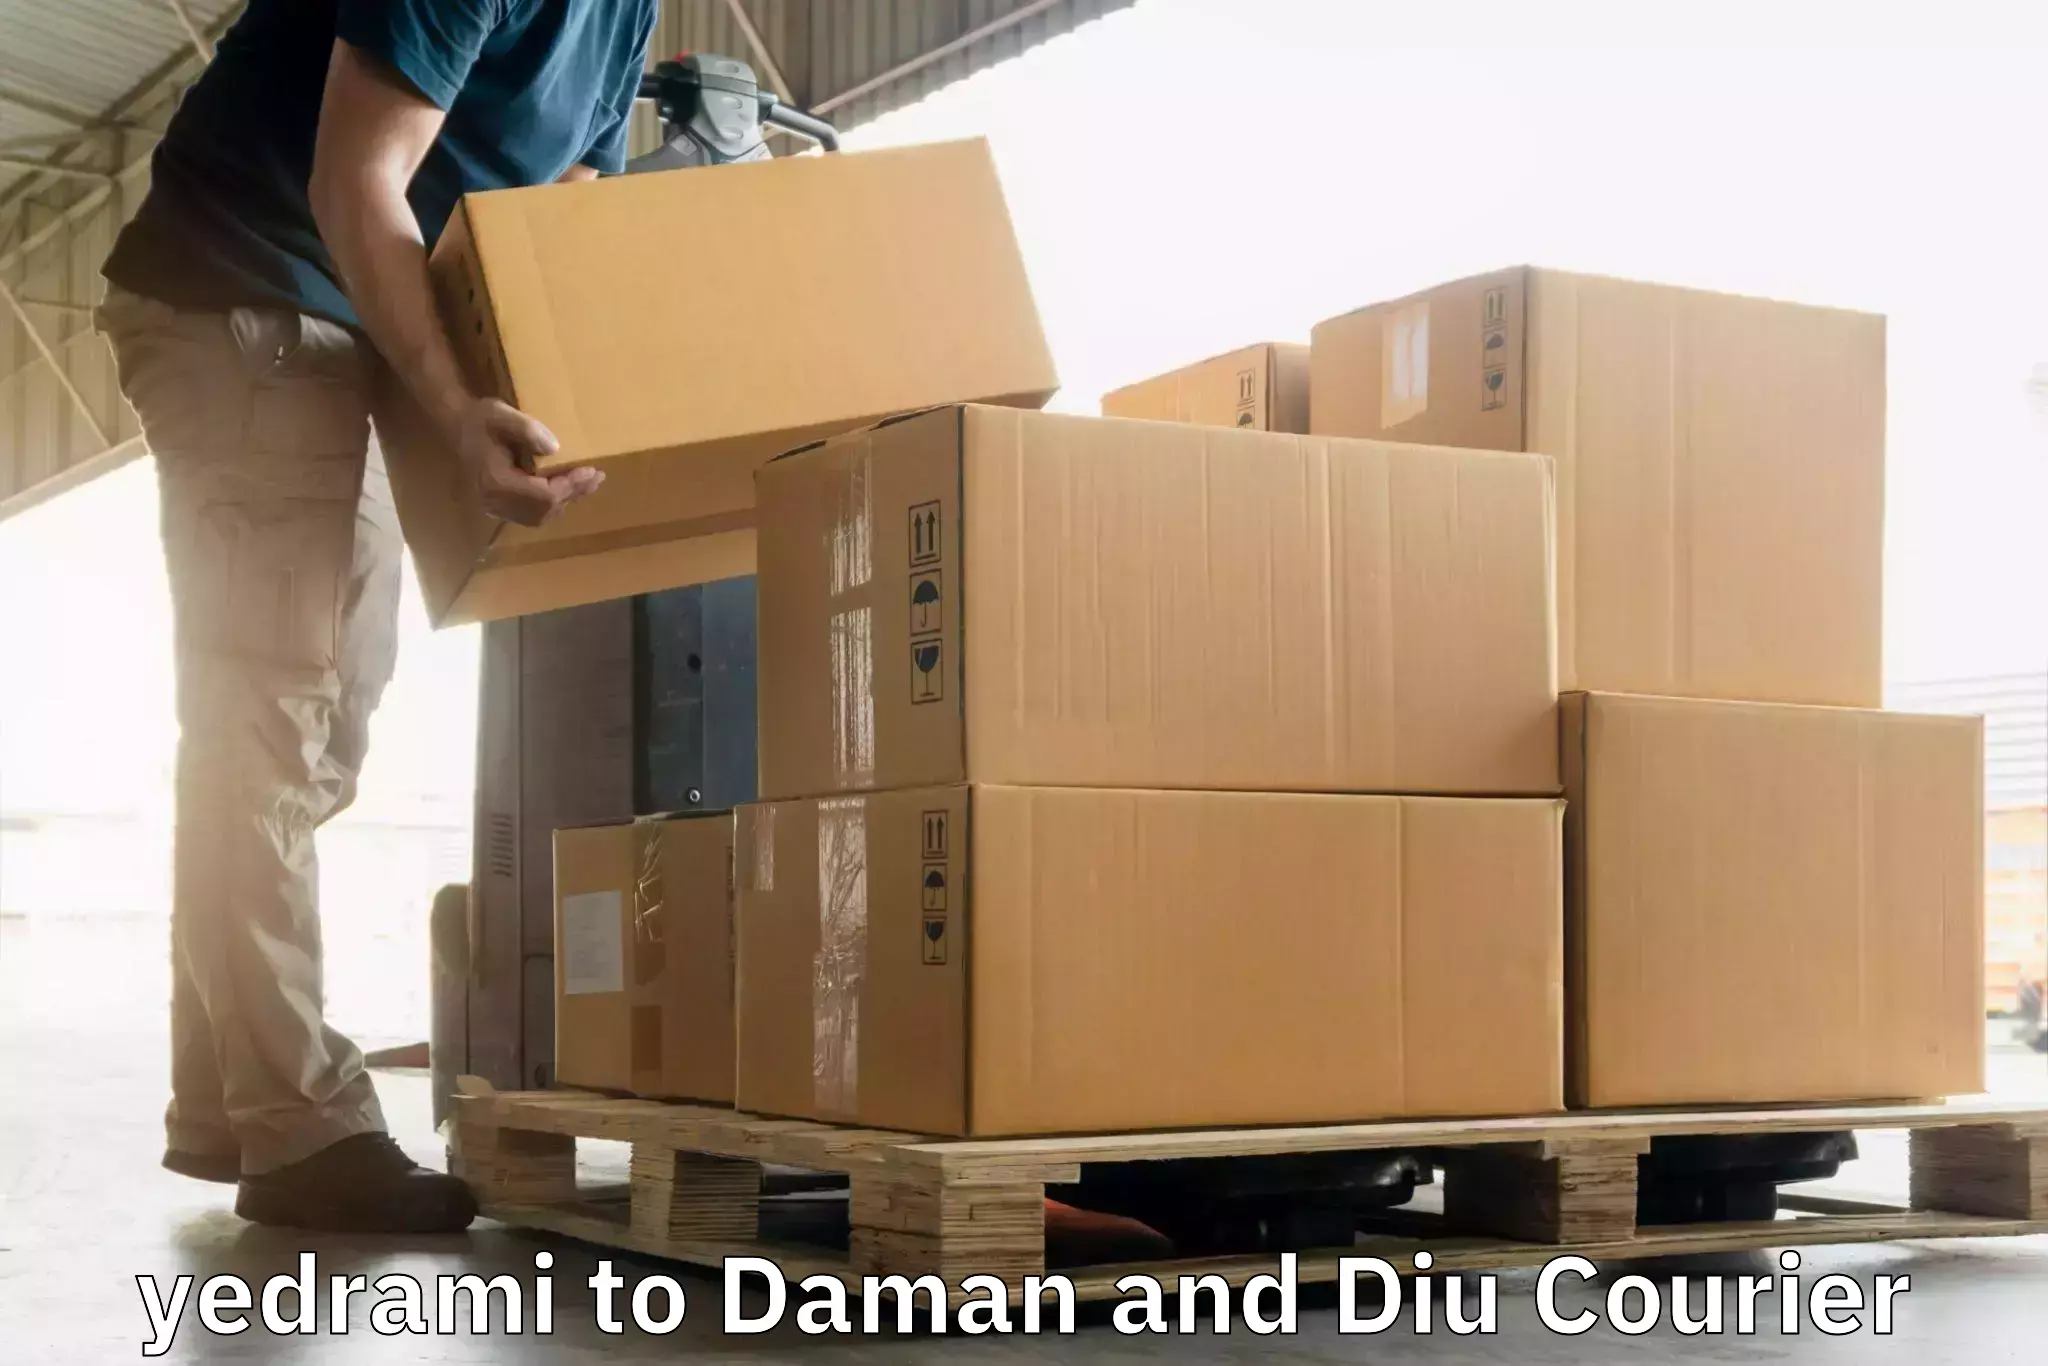 Trackable shipping service yedrami to Daman